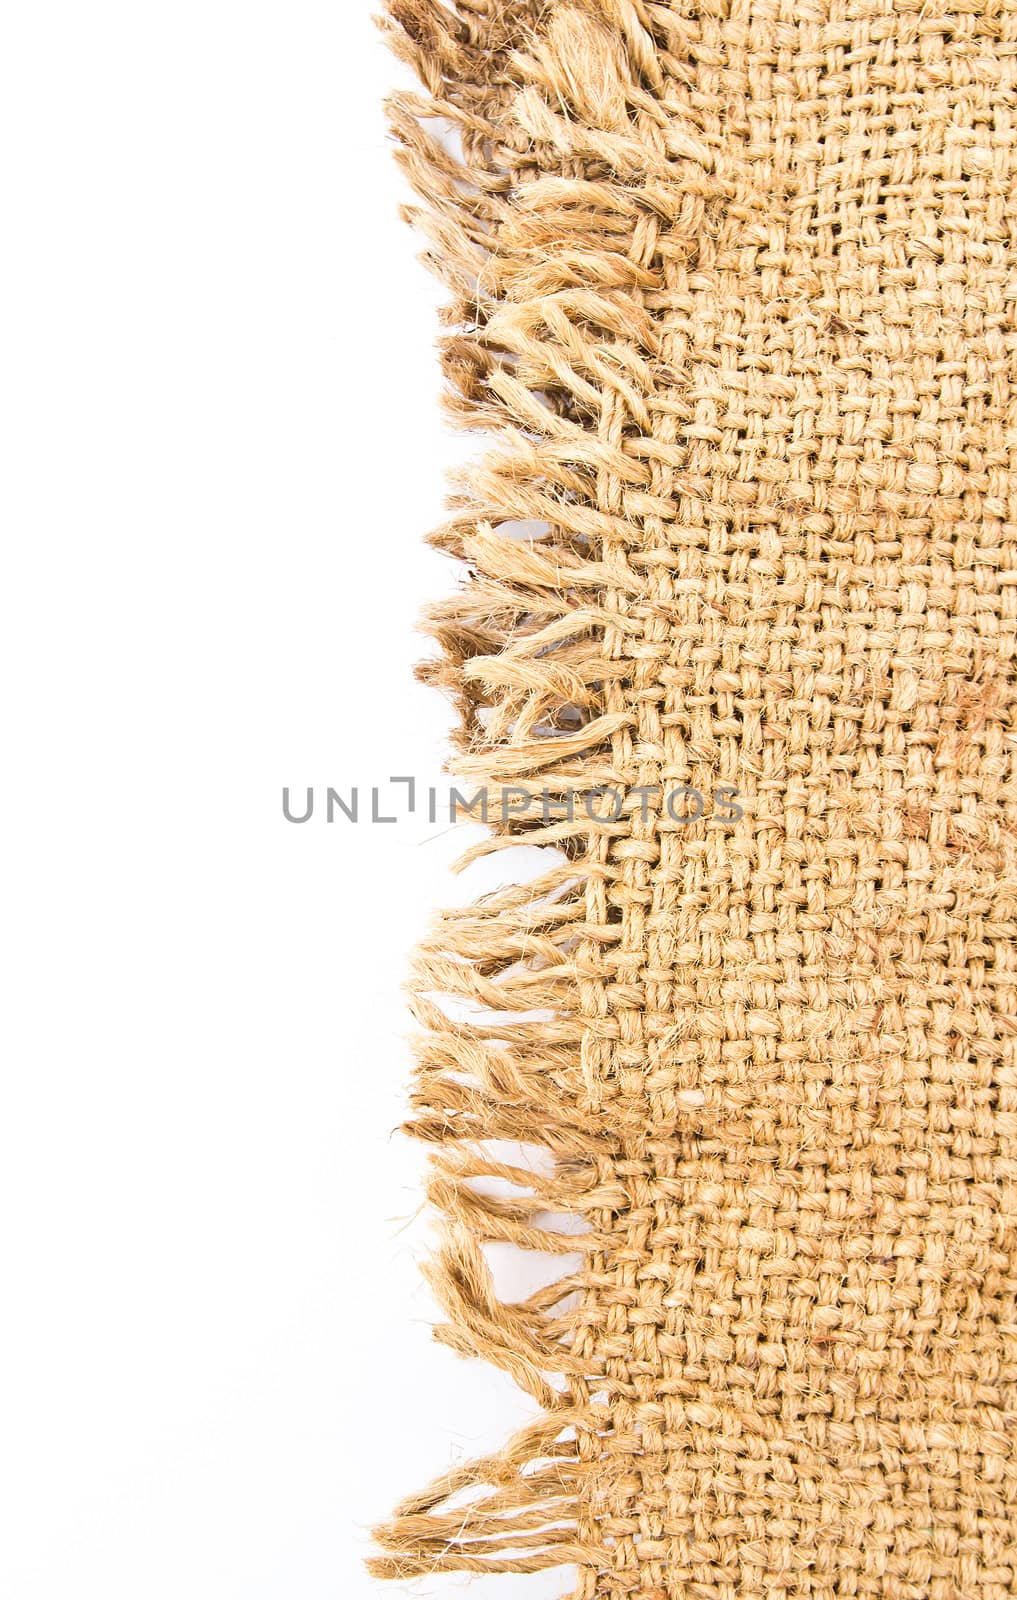 Perfect old cloth sack isolated on white background